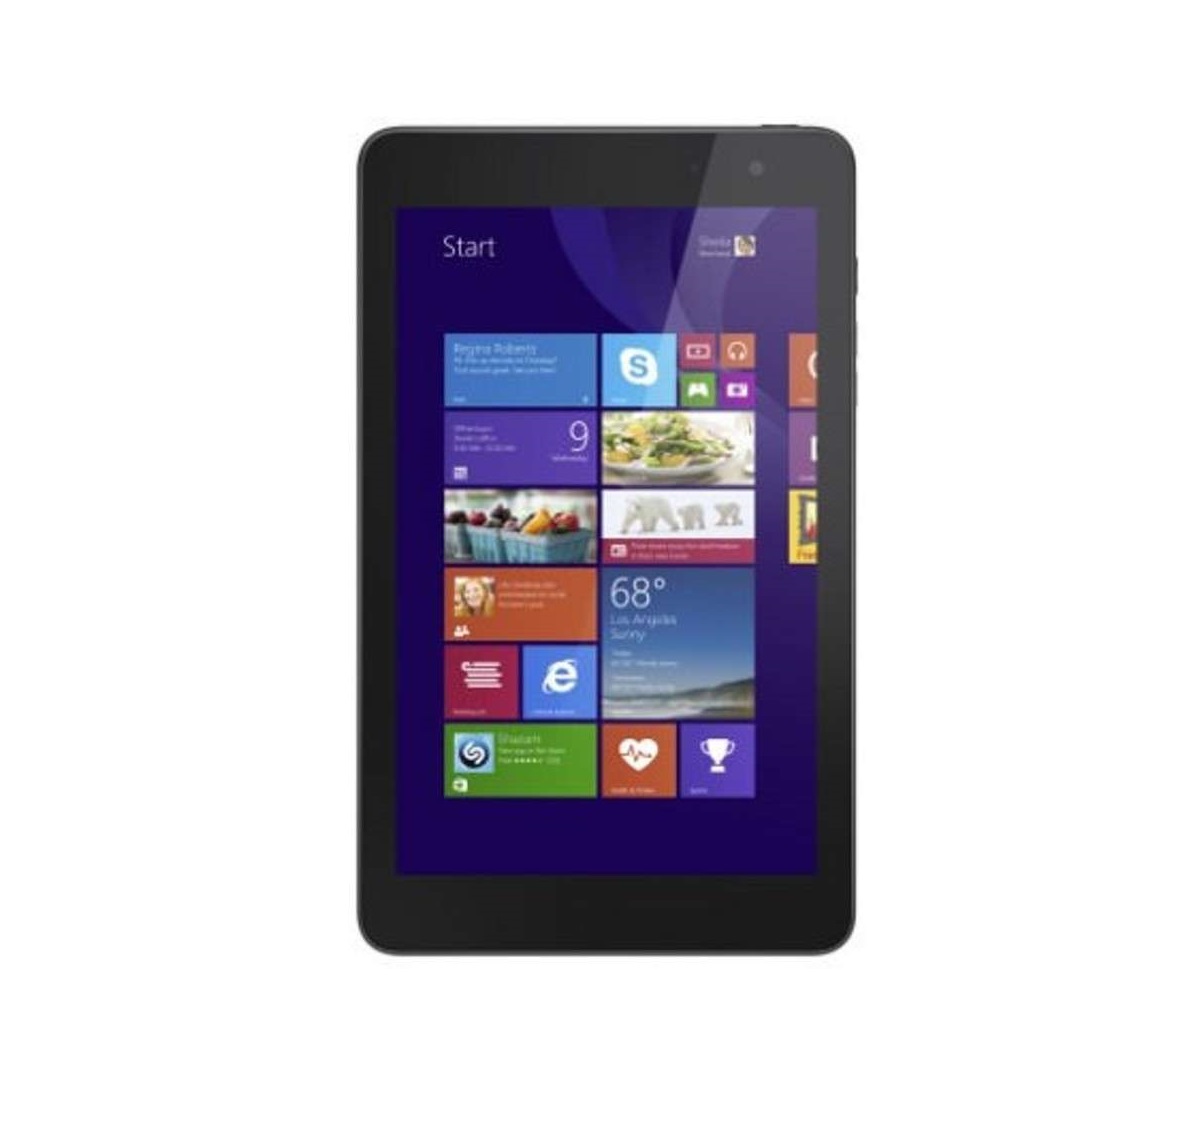 Spain Ongoing gallon Dell Venue 8 (5830) 16GB | Wi-Fi | 8-Inch – Black Tablet - Discount Tech  Direct